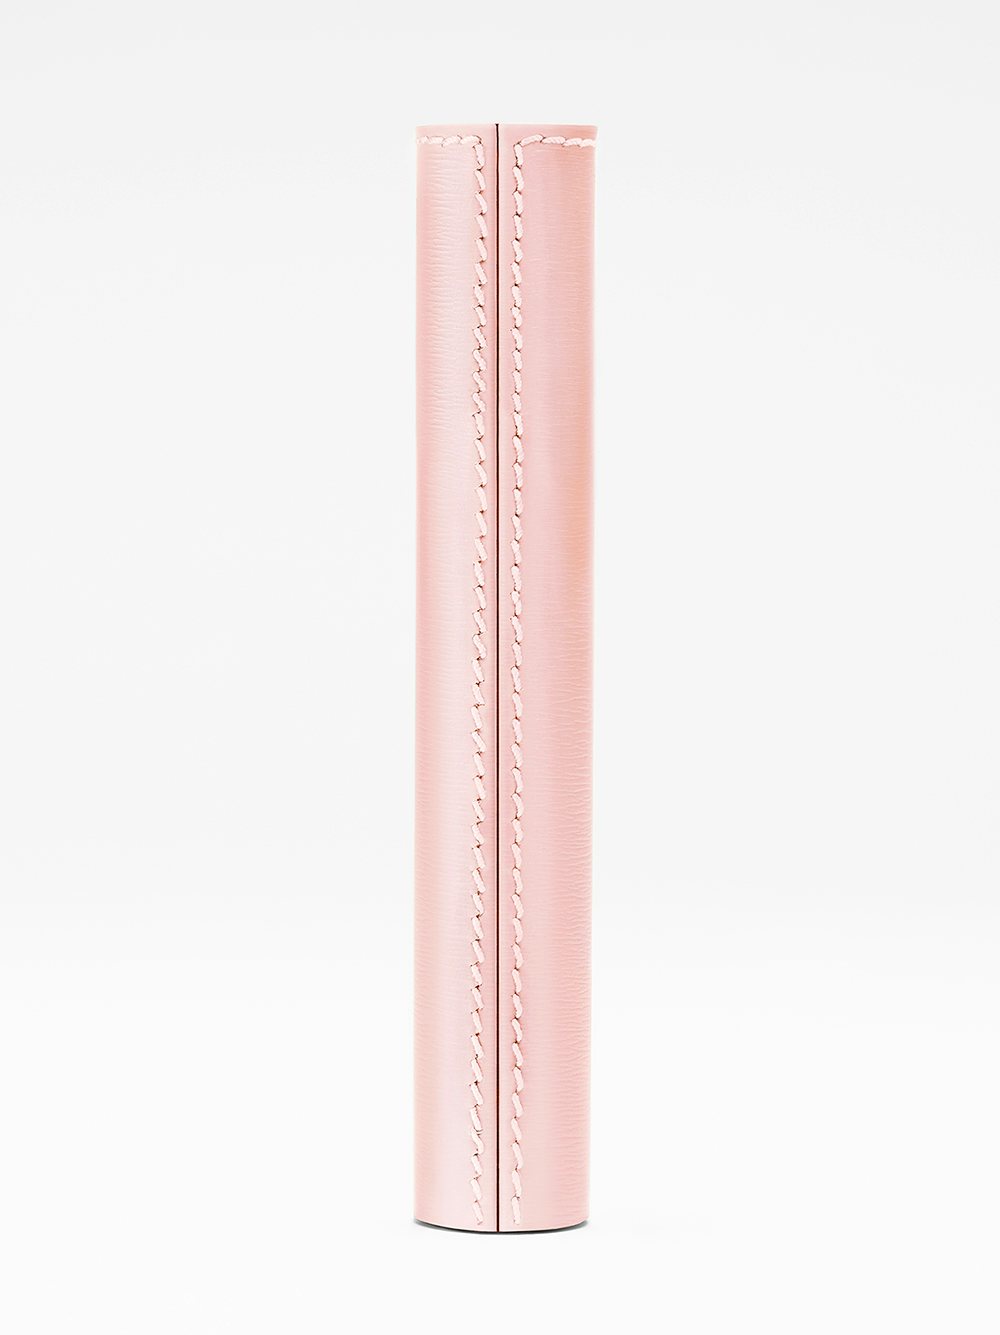 La bouche rouge Pink leather sleeve with stitches - back